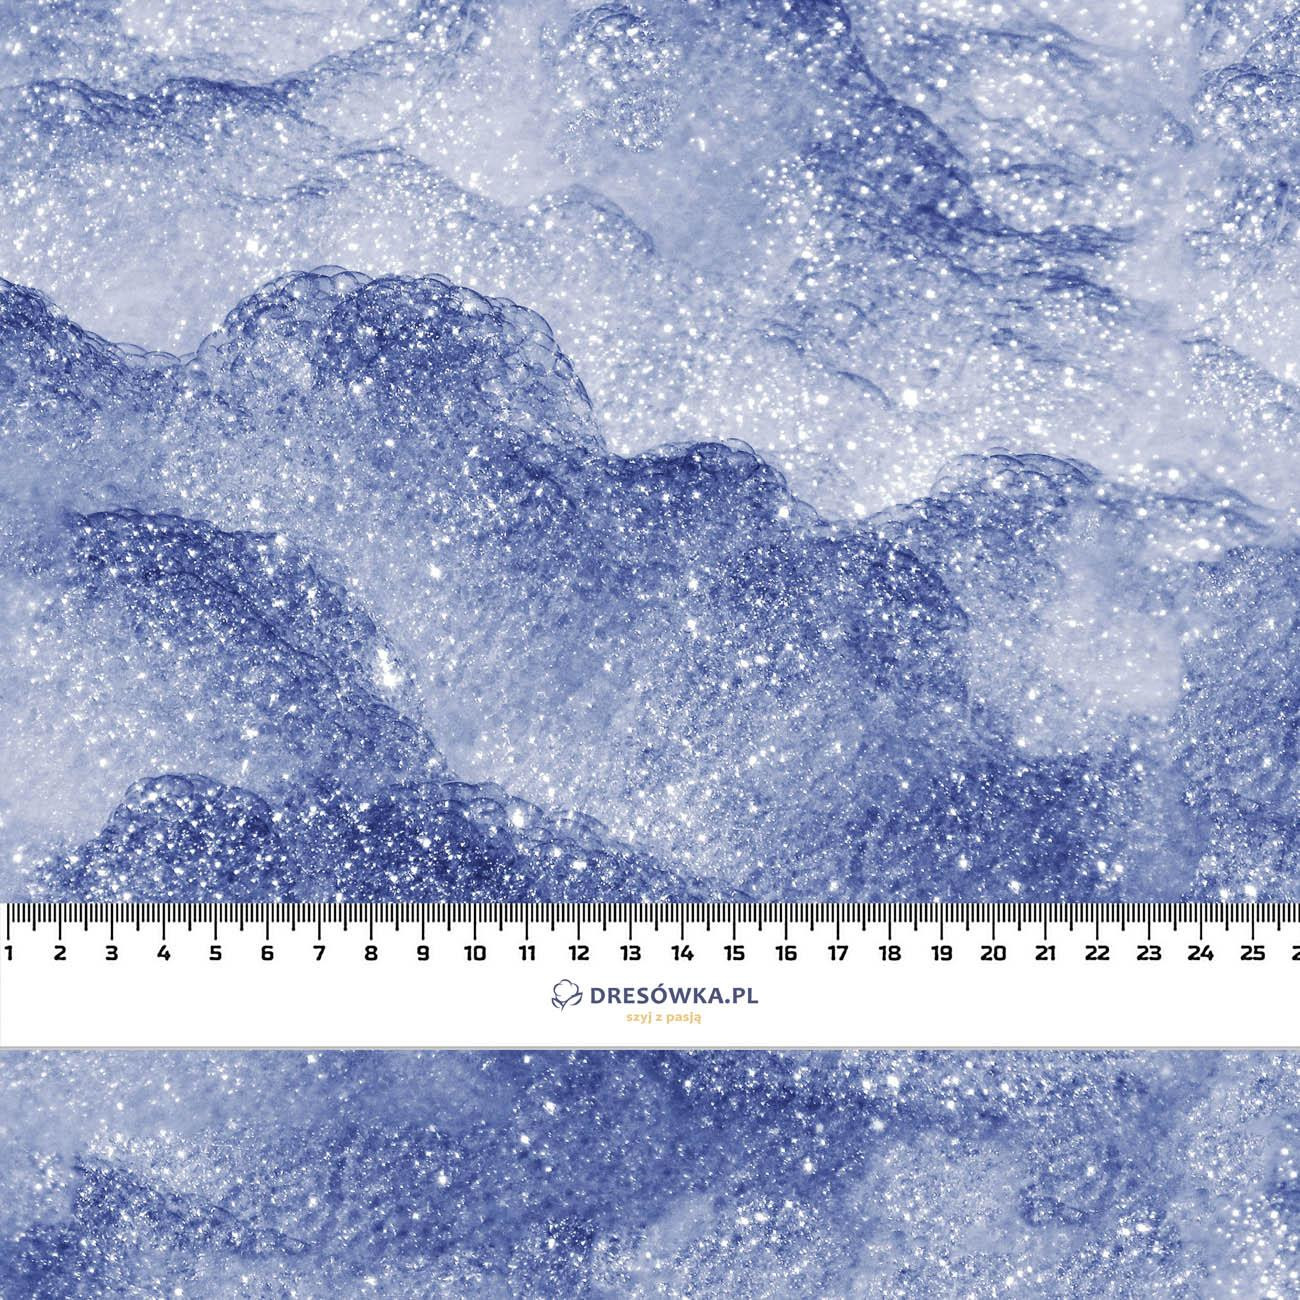 SNOW / blue (PAINTED ON GLASS) - Waterproof woven fabric